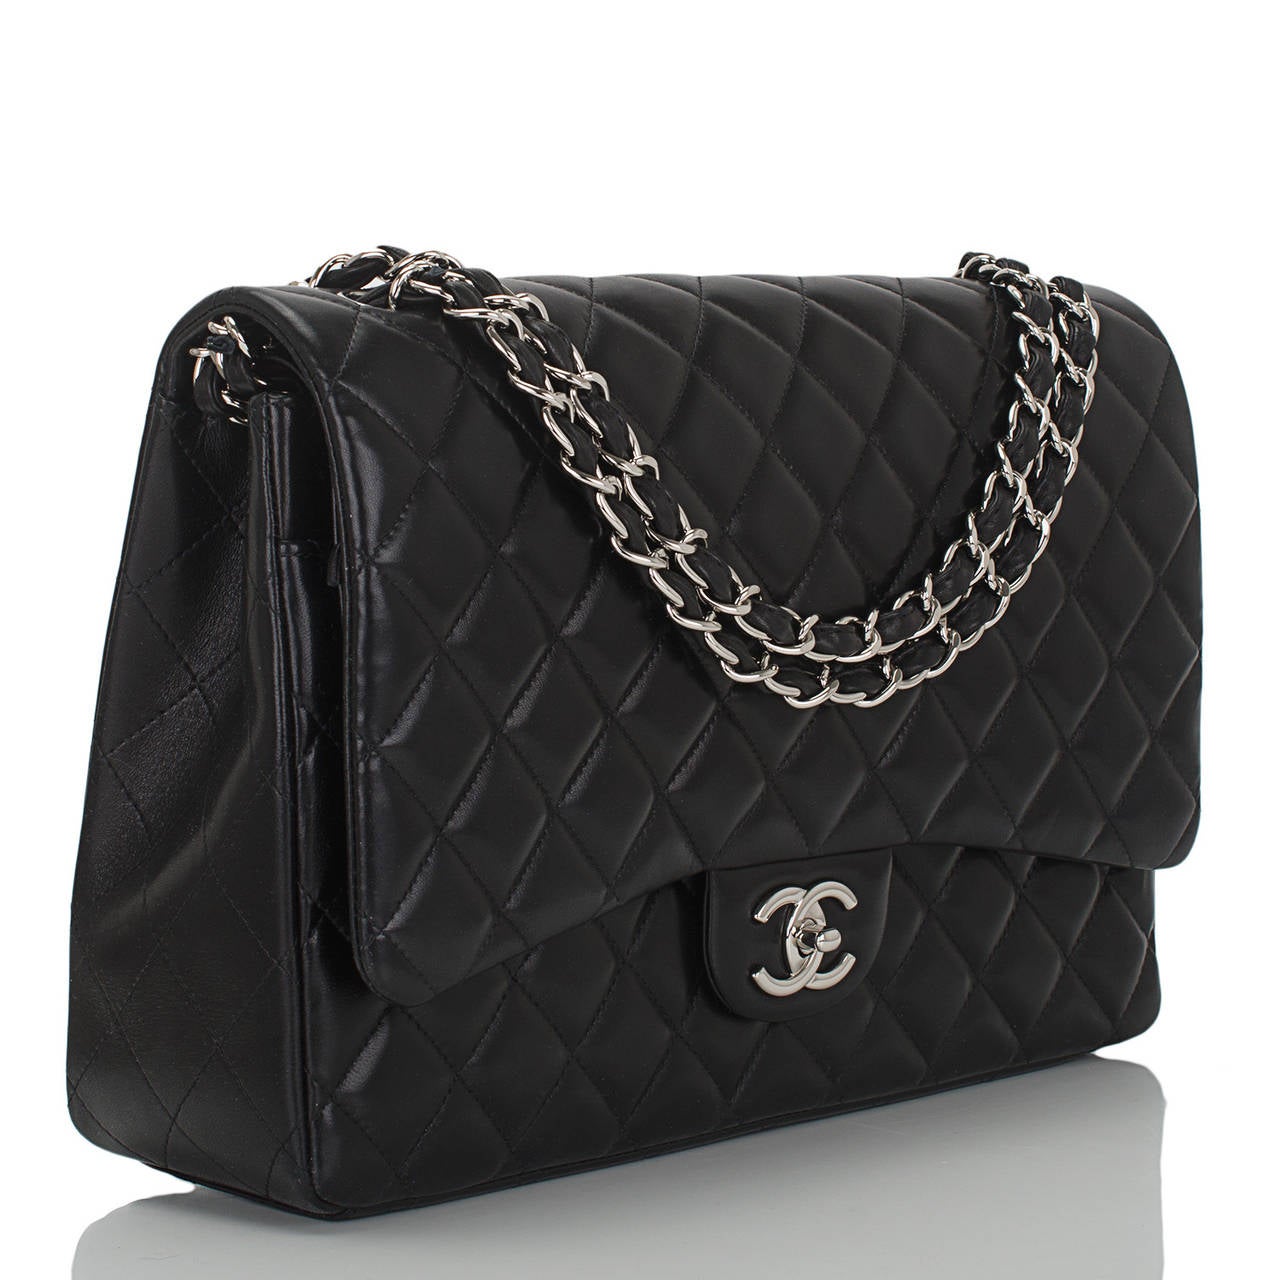 This Chanel Maxi Classic double flap of black quilted lambskin leather features a front flap with signature CC turnlock closure, a half moon back pocket, and an adjustable interwoven silver tone chain link and black leather shoulder strap.

The